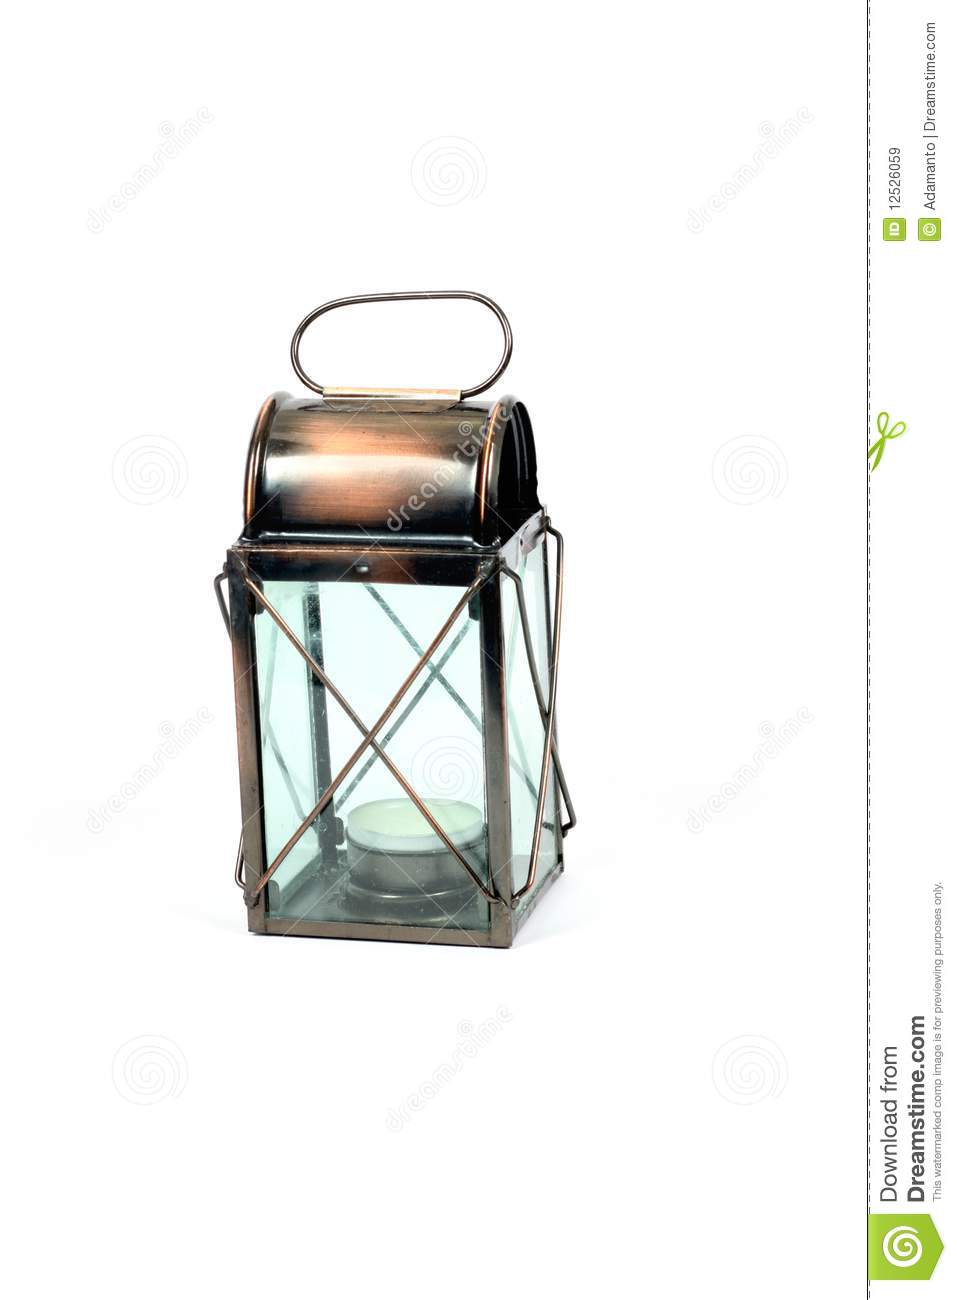 The Candle Lantern Royalty Free Stock Images   Image  12526059